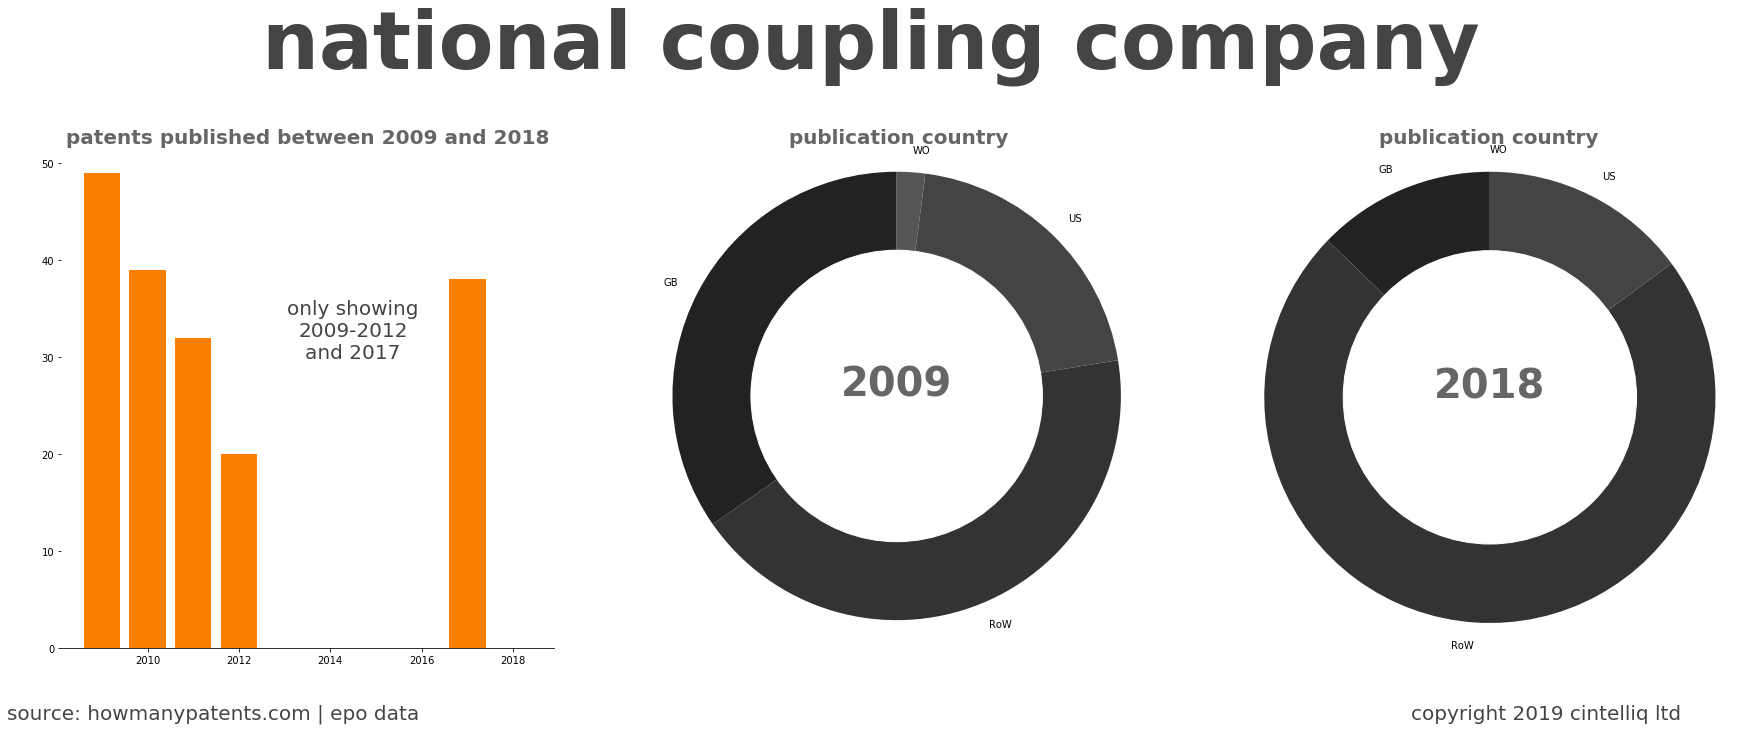 summary of patents for National Coupling Company